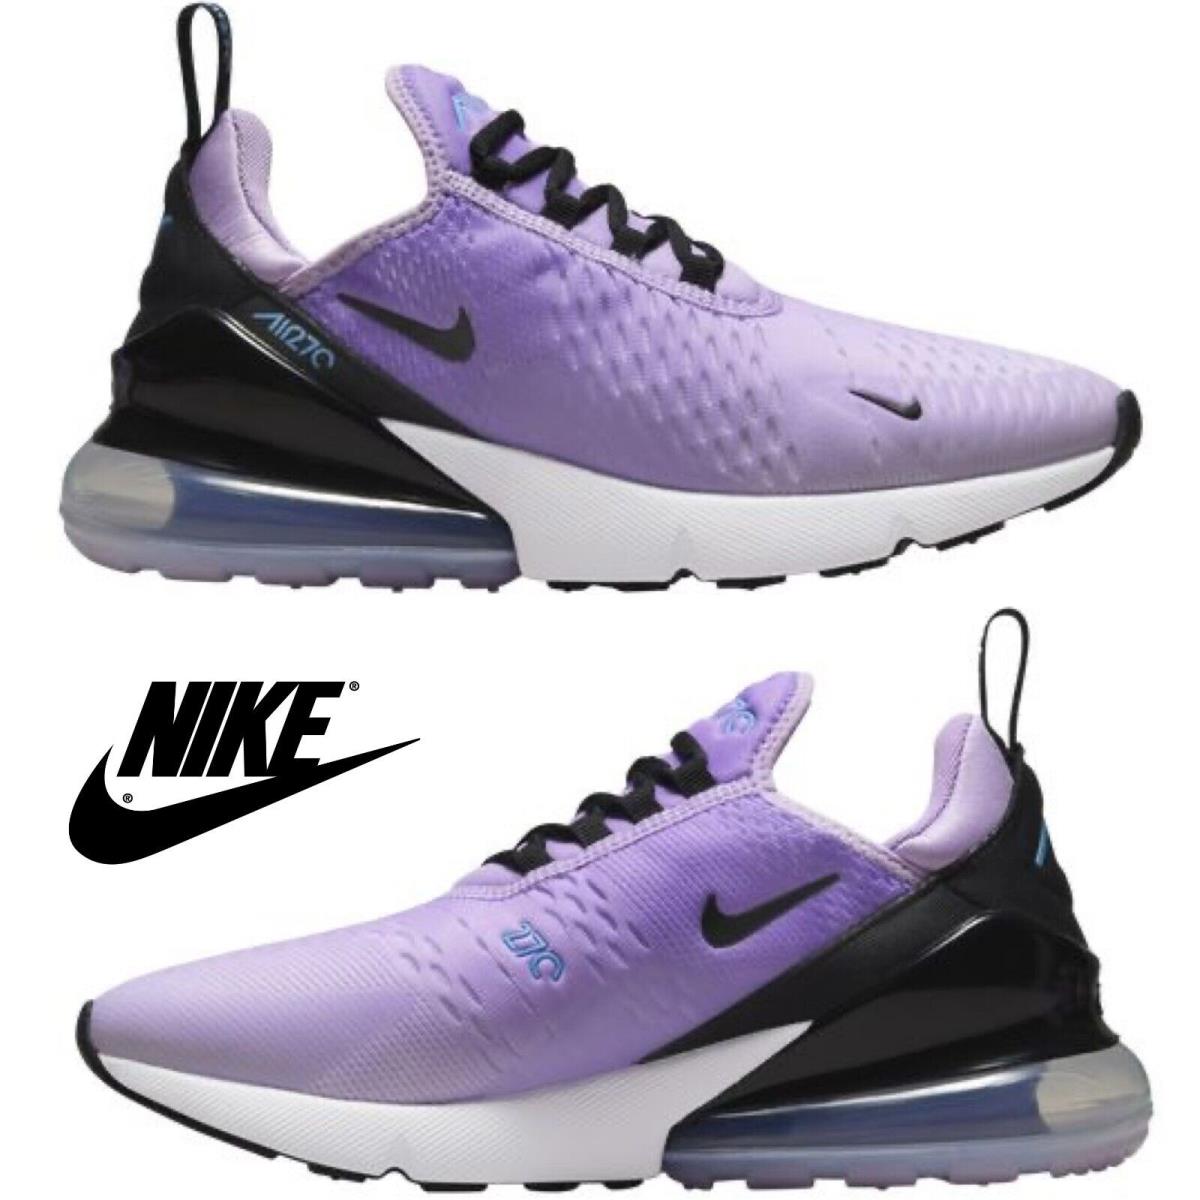 Nike Air Max 270 Shoes Women`s Sneakers Casual Running Sport Black Lilac Purple